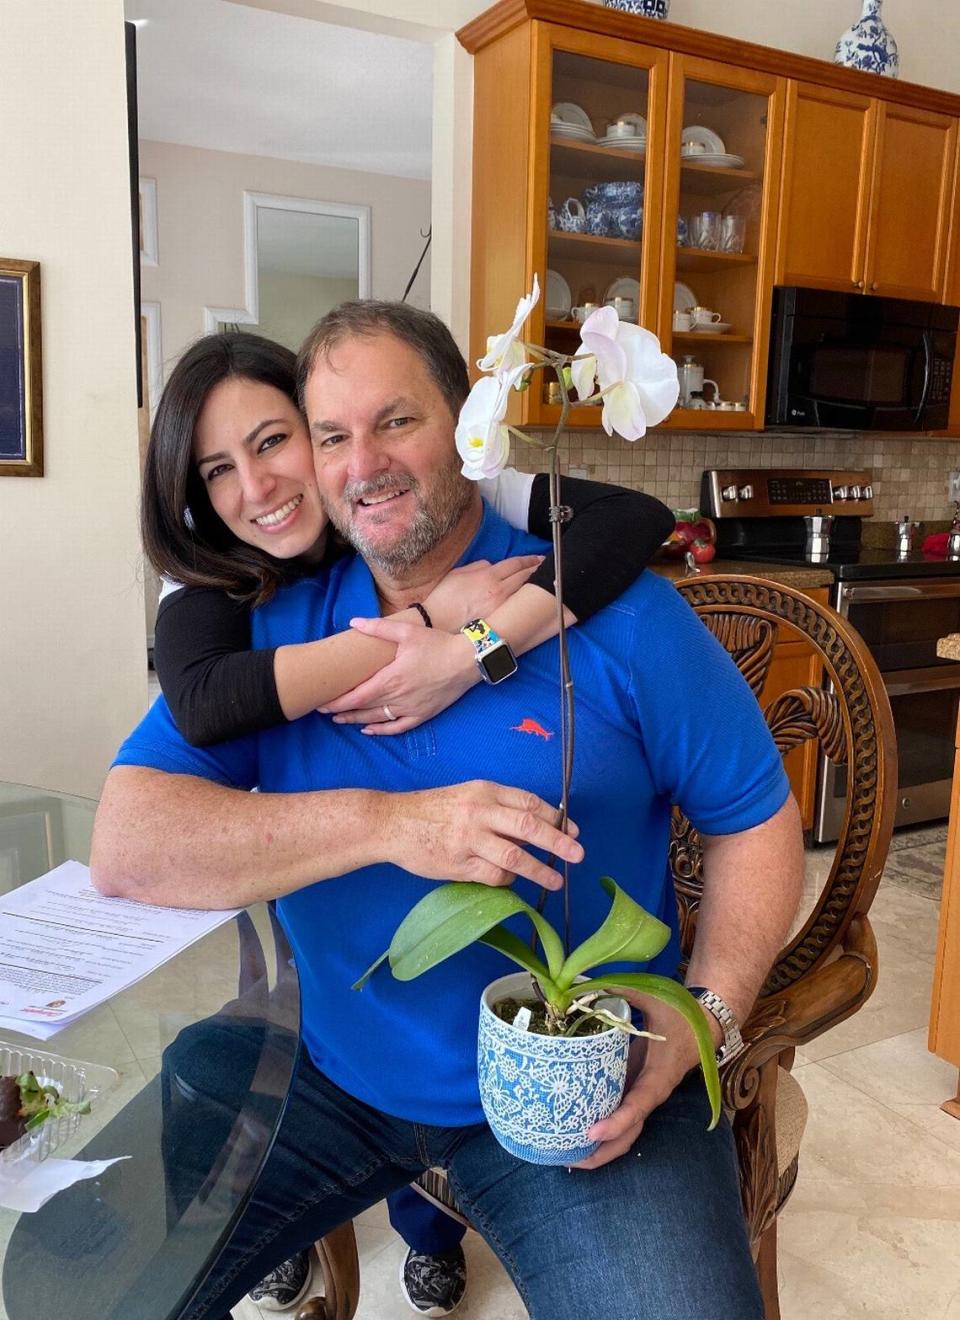 Dr. Carlos Vallejo, an internist in South Florida, poses with his daughter Gisselle Vallejo. Carlos Vallejo died from complications stemming from COVID-19 on Aug. 1, 2020.